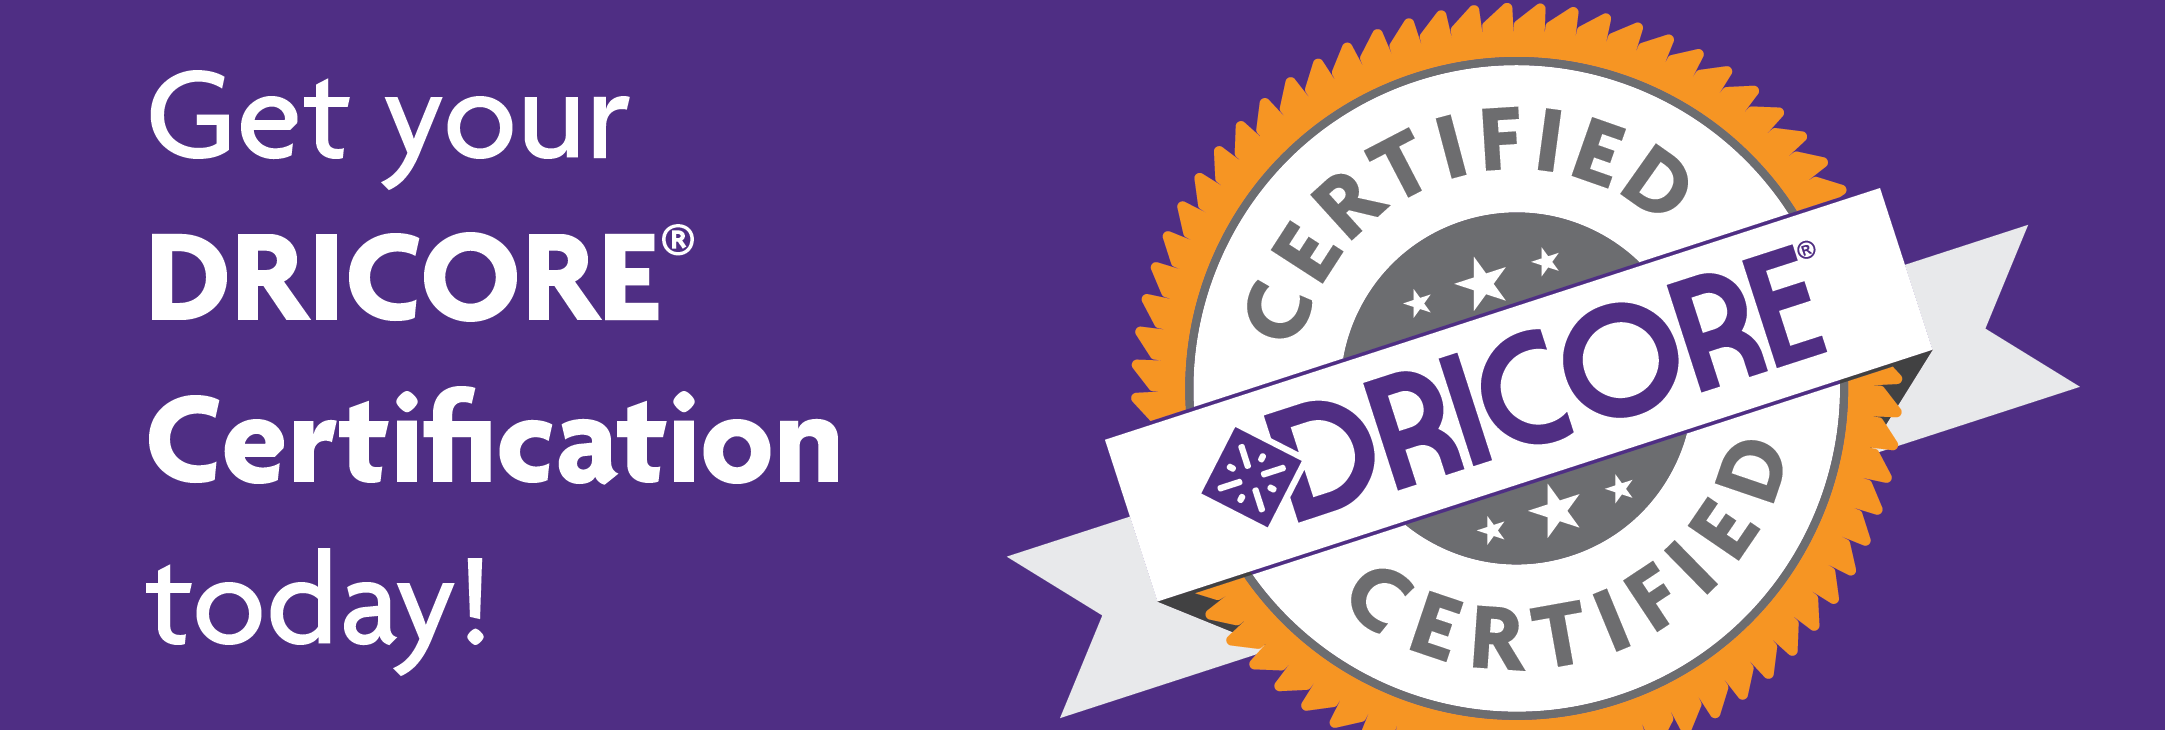 Get your DRICORE Certification today!